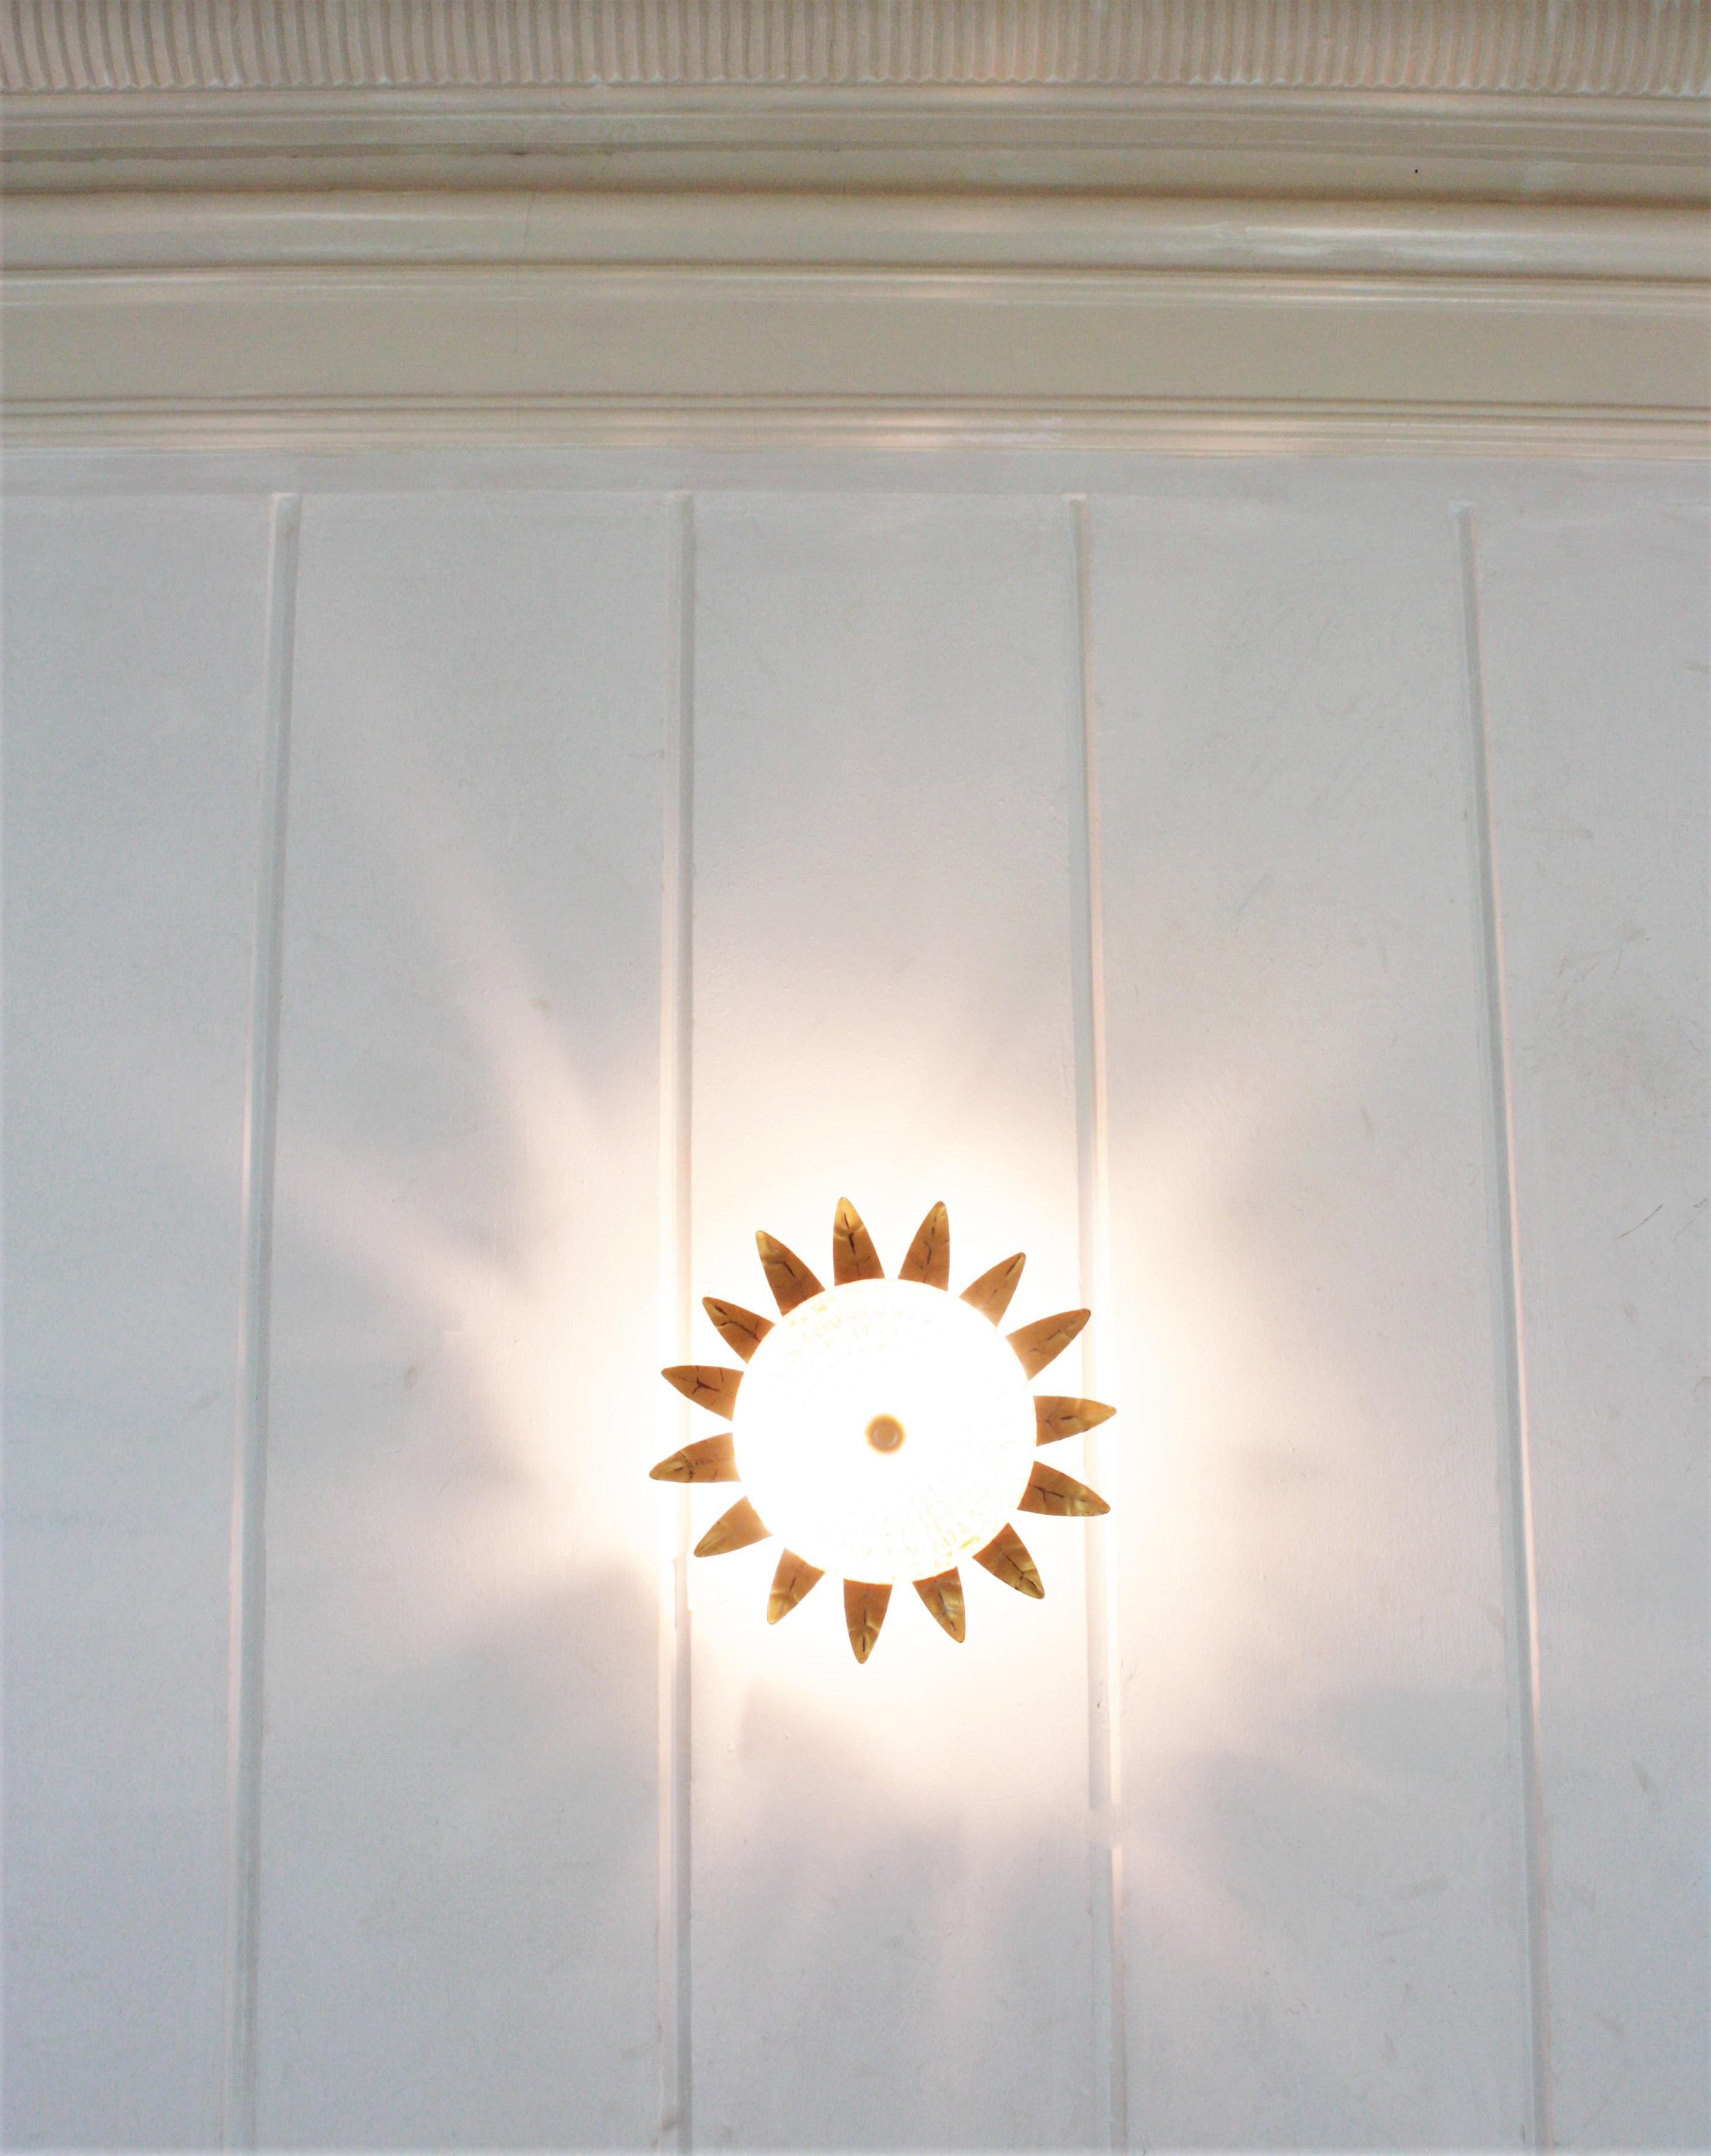 Sunburst Crown Light Fixture in Gilt Iron and Glass, 1950s For Sale 6